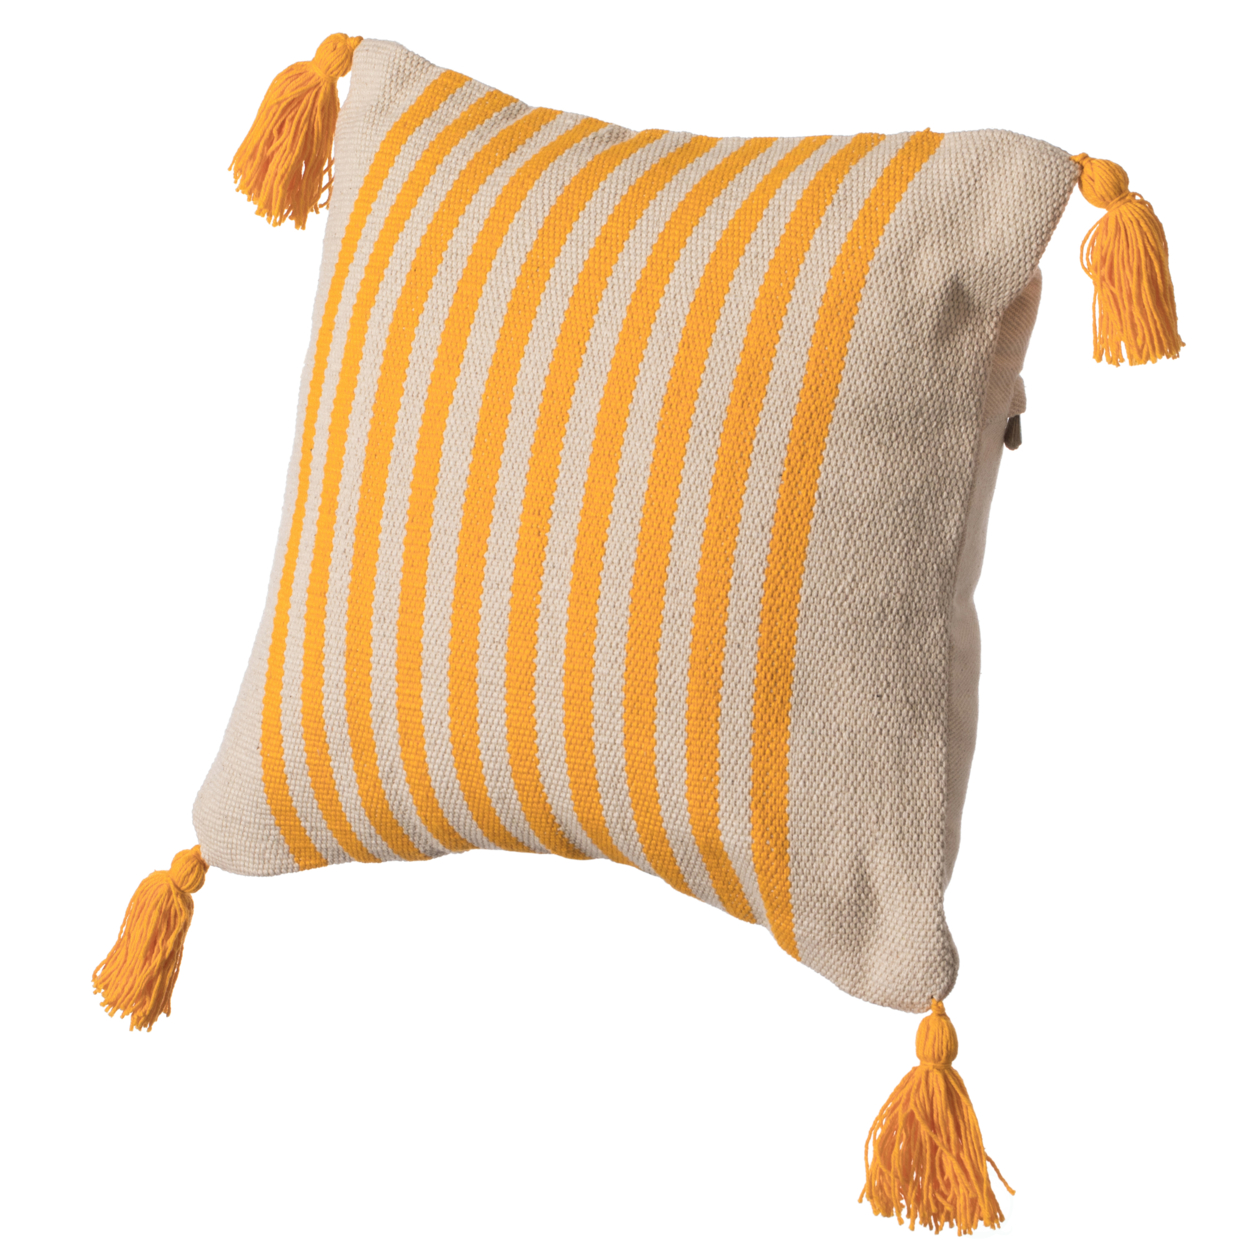 16 Handwoven Cotton Throw Pillow Cover With Striped Lines, Black - Yellow